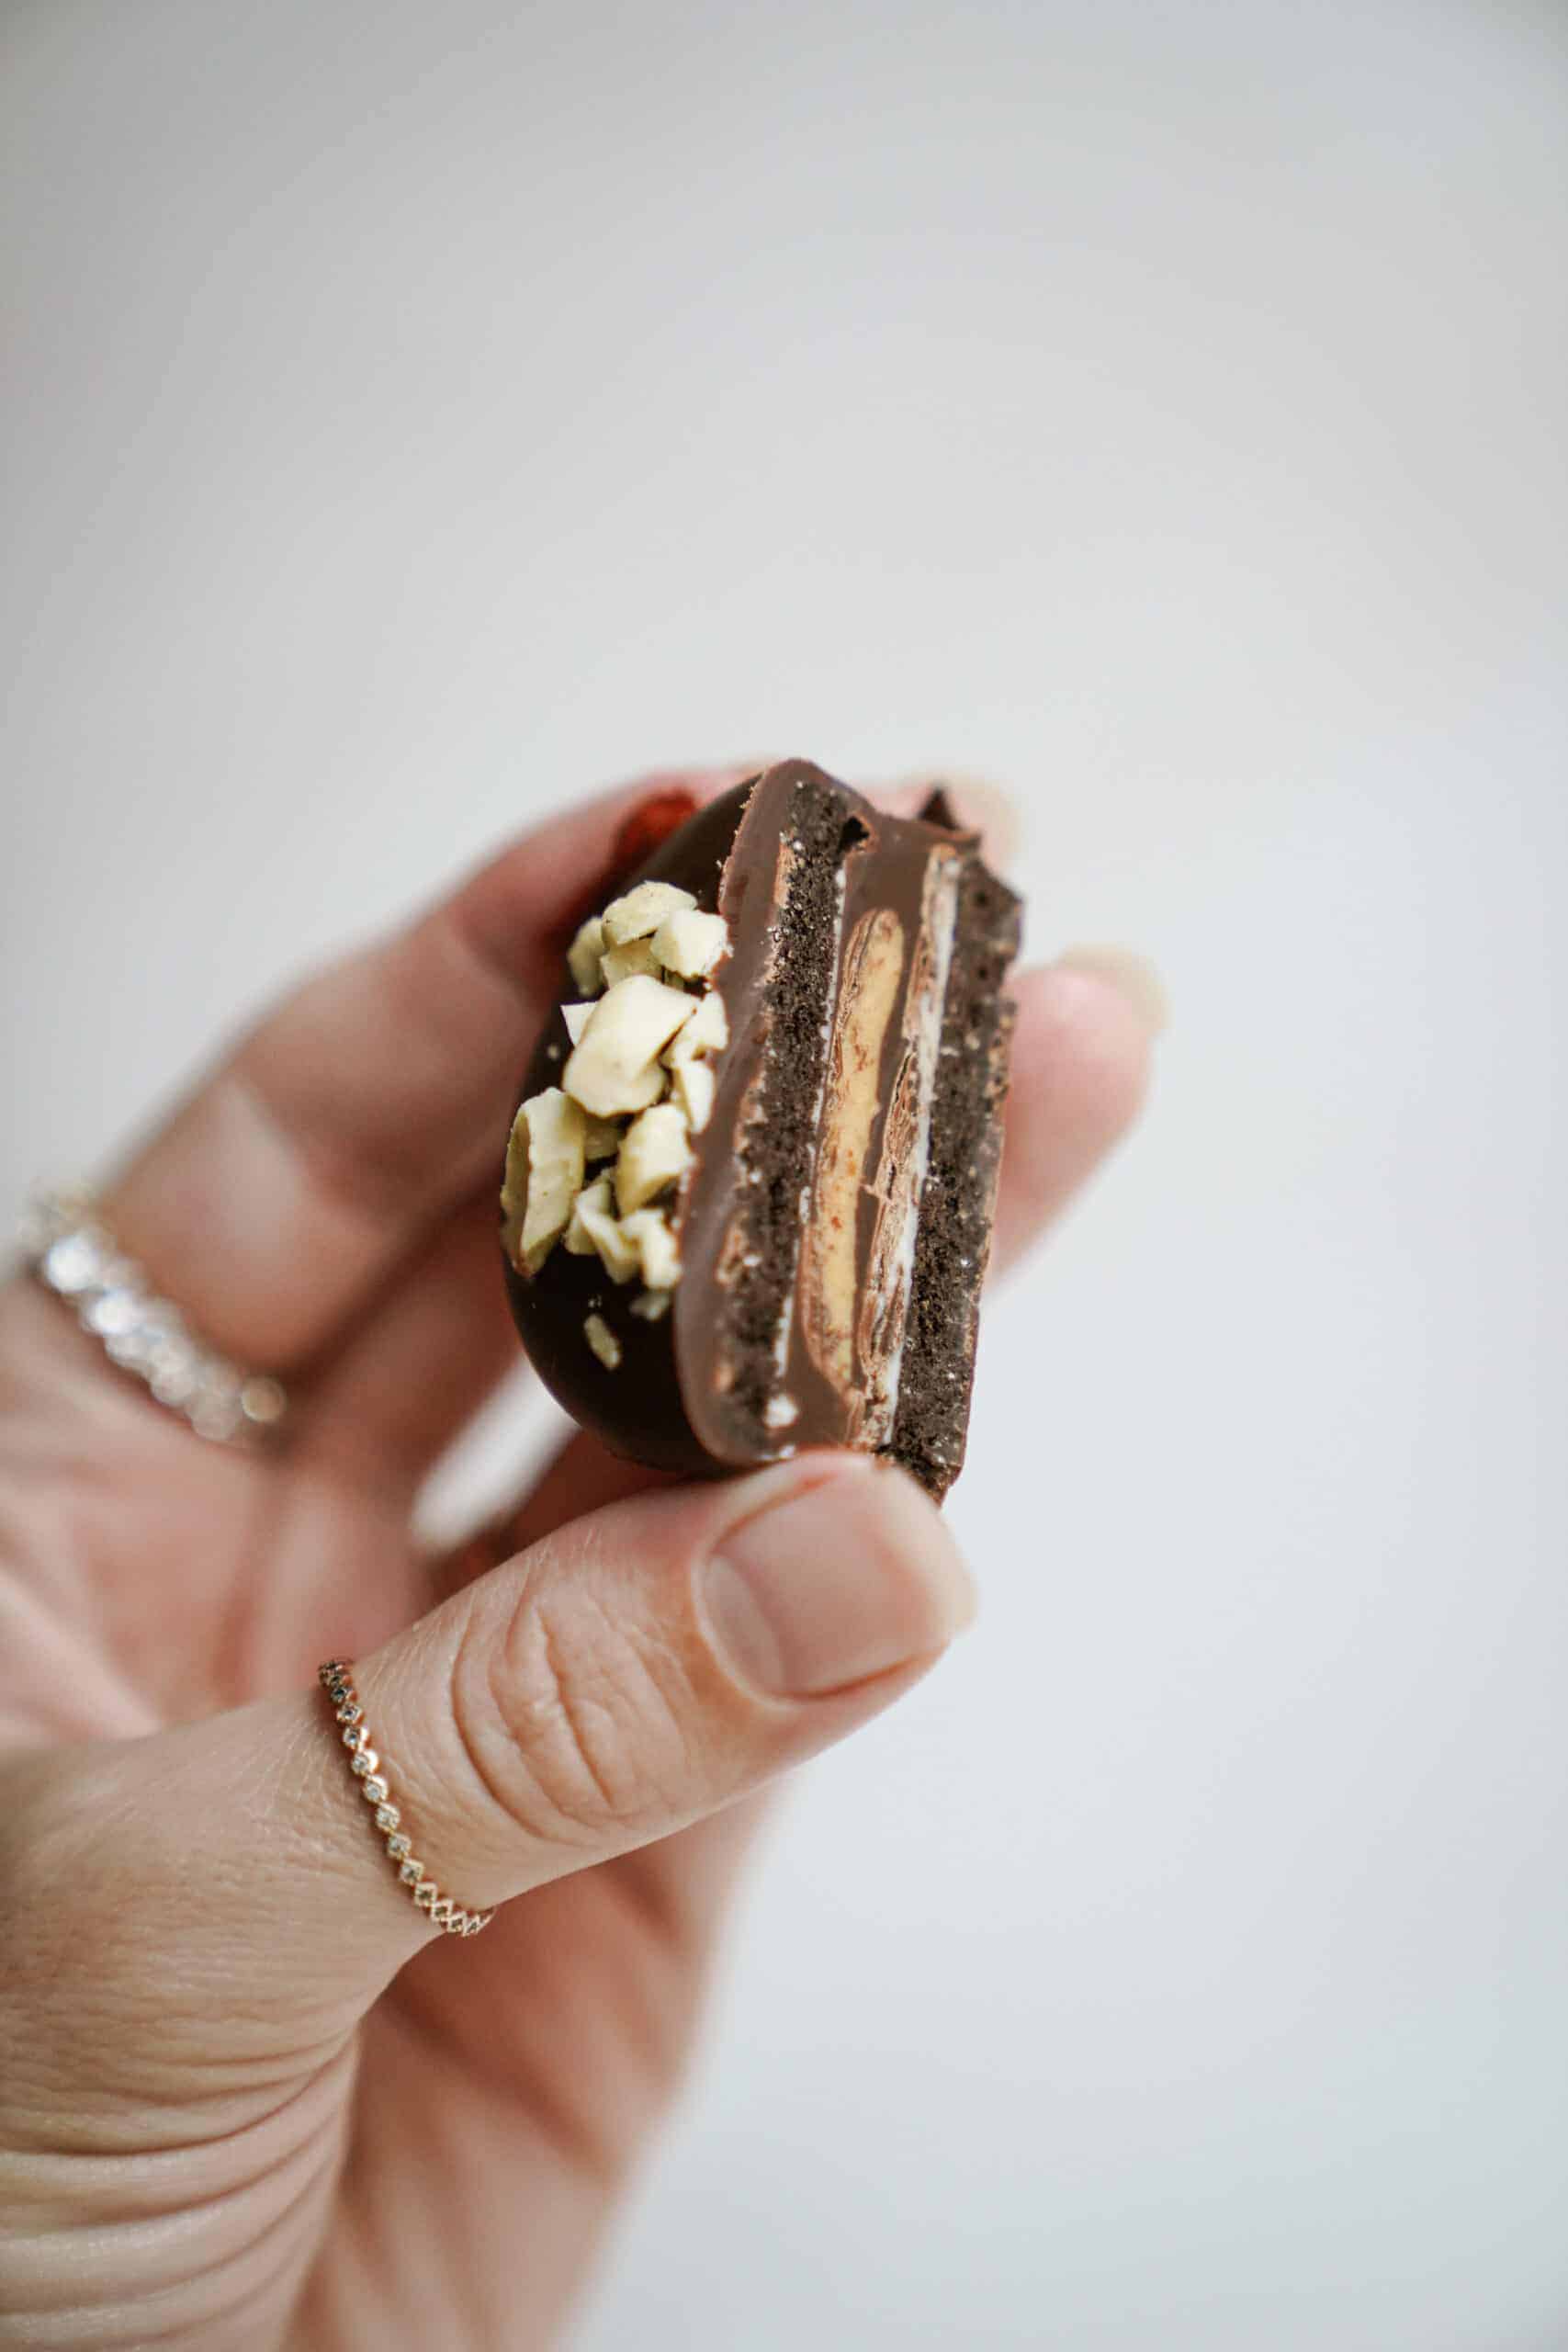 Hand holding a single Chocolate Dipped Peanut Butter Cup Stuffed Oreo